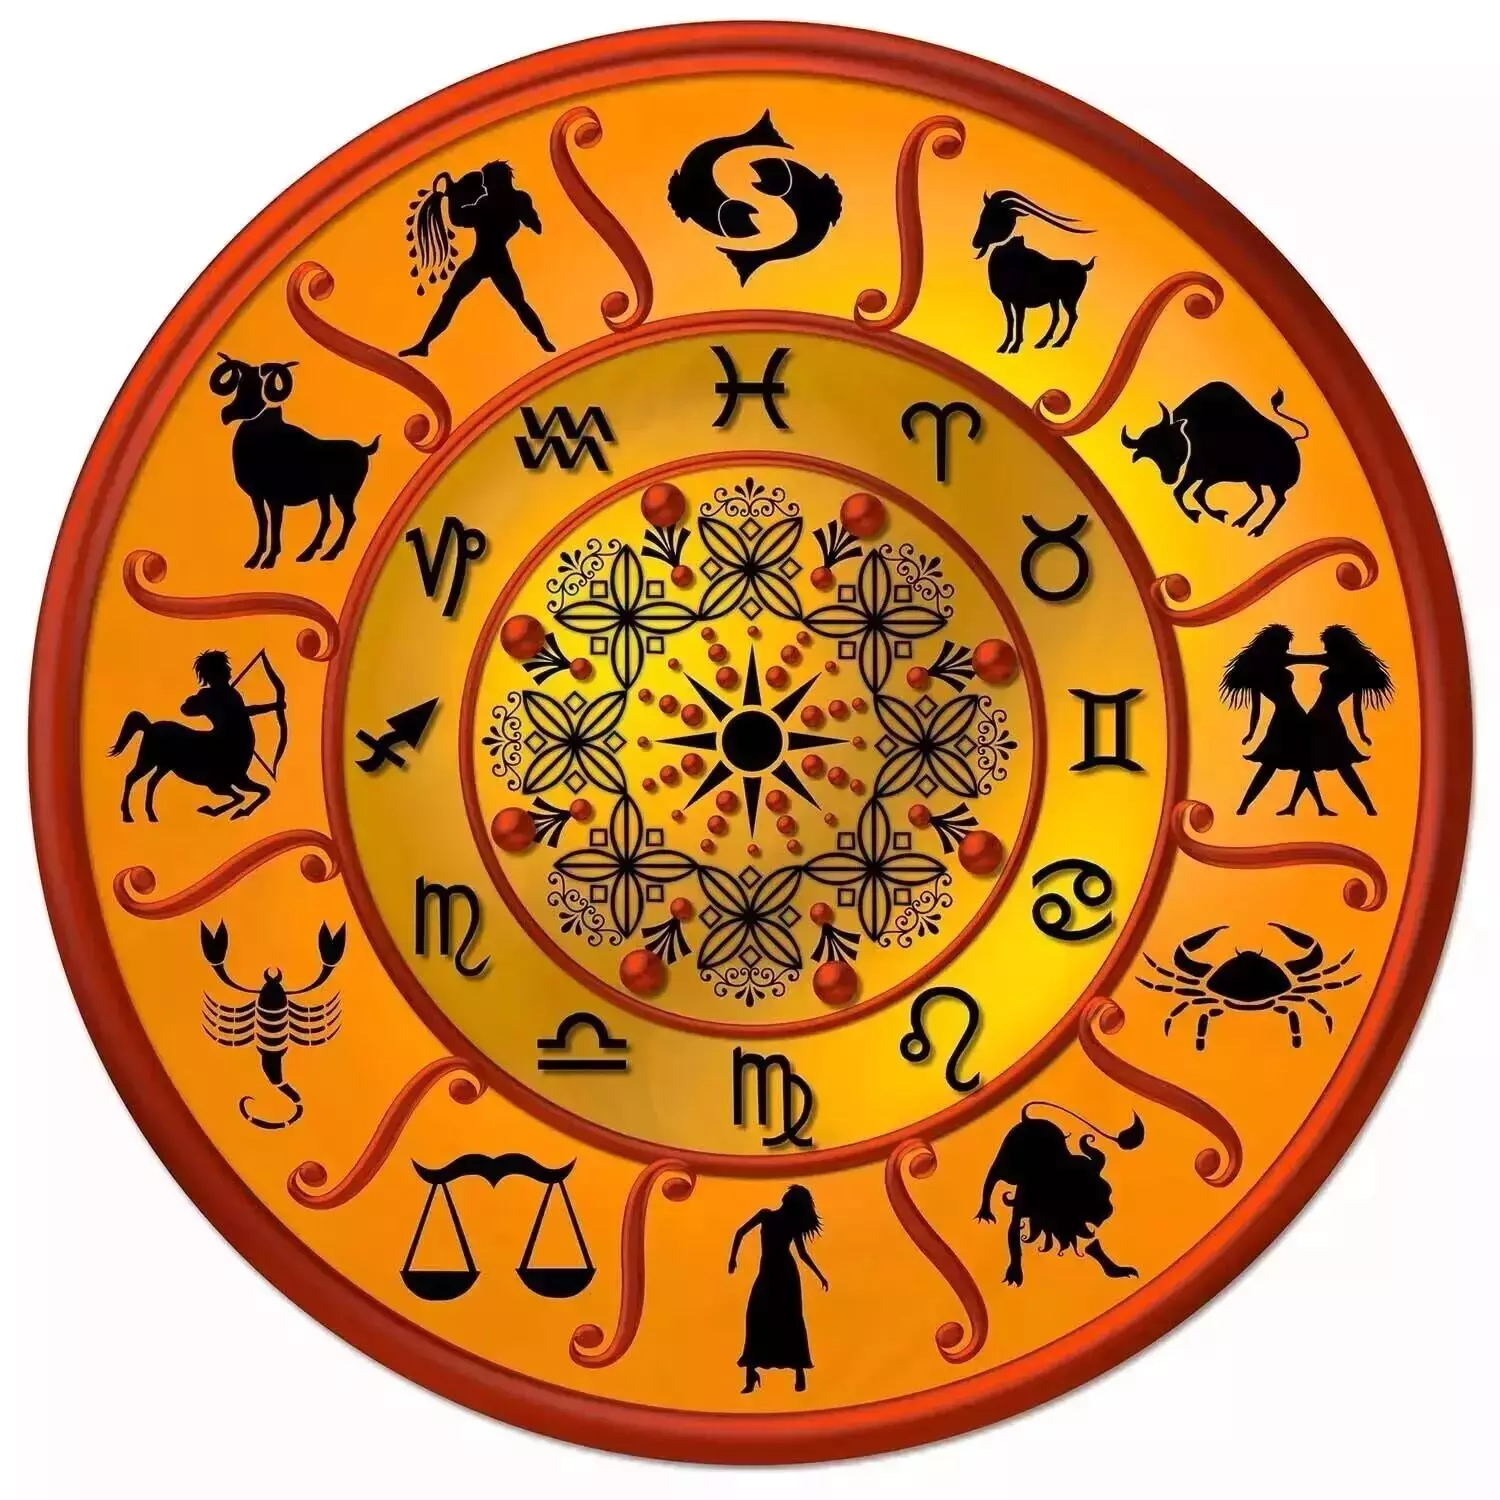 29 March  – Know your todays horoscope